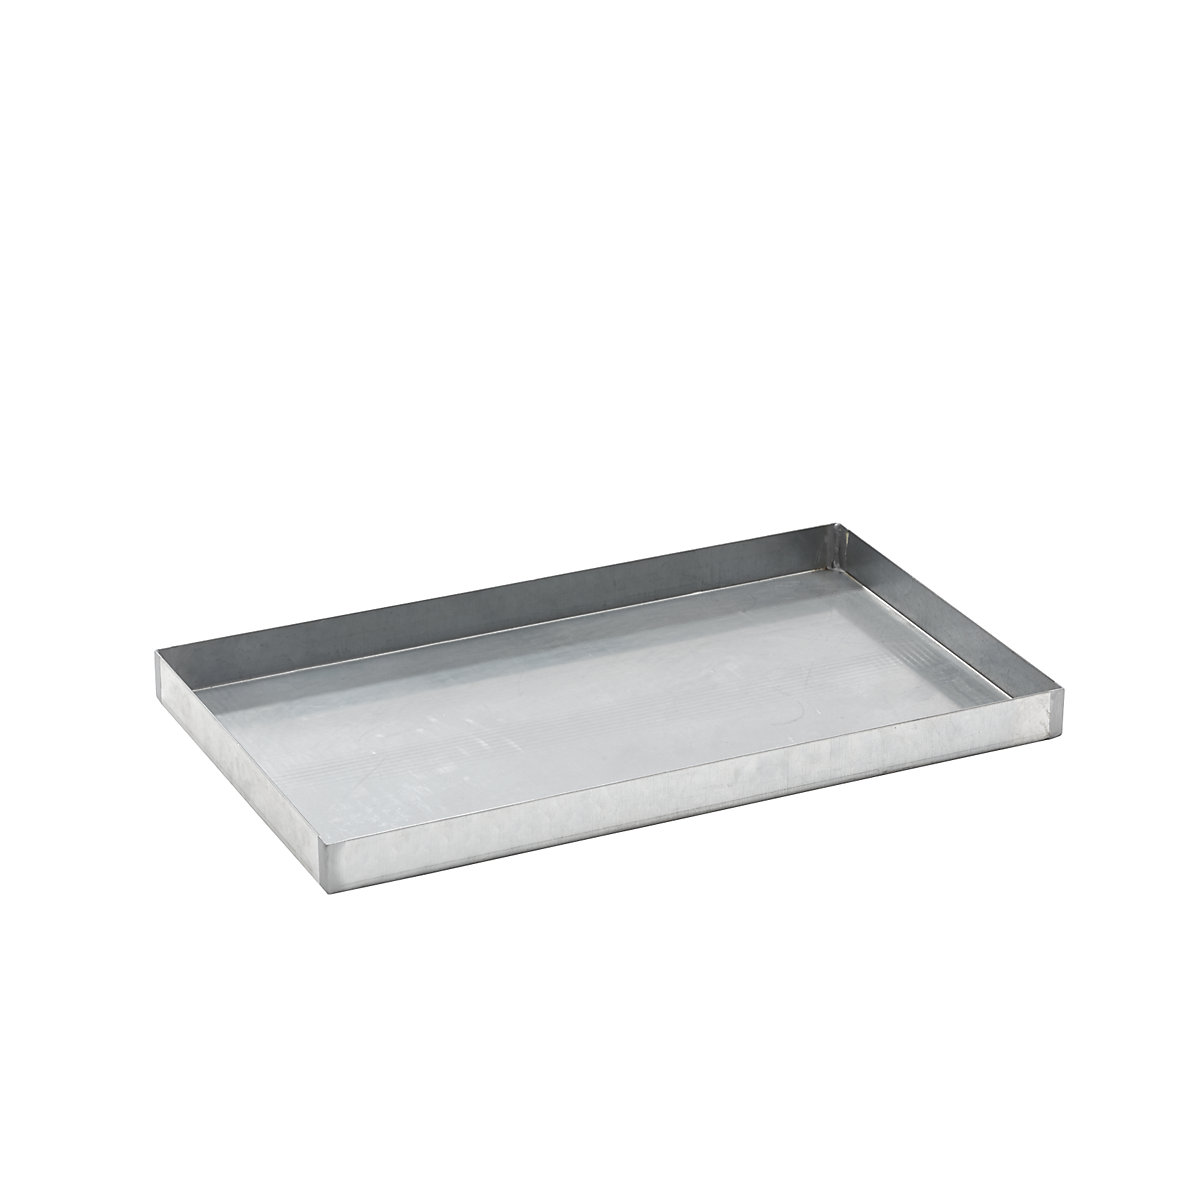 Steel sump tray for small containers – eurokraft basic, LxWxH 1000 x 600 x 70 mm, with certification, sump capacity 30 l, zinc plated-3